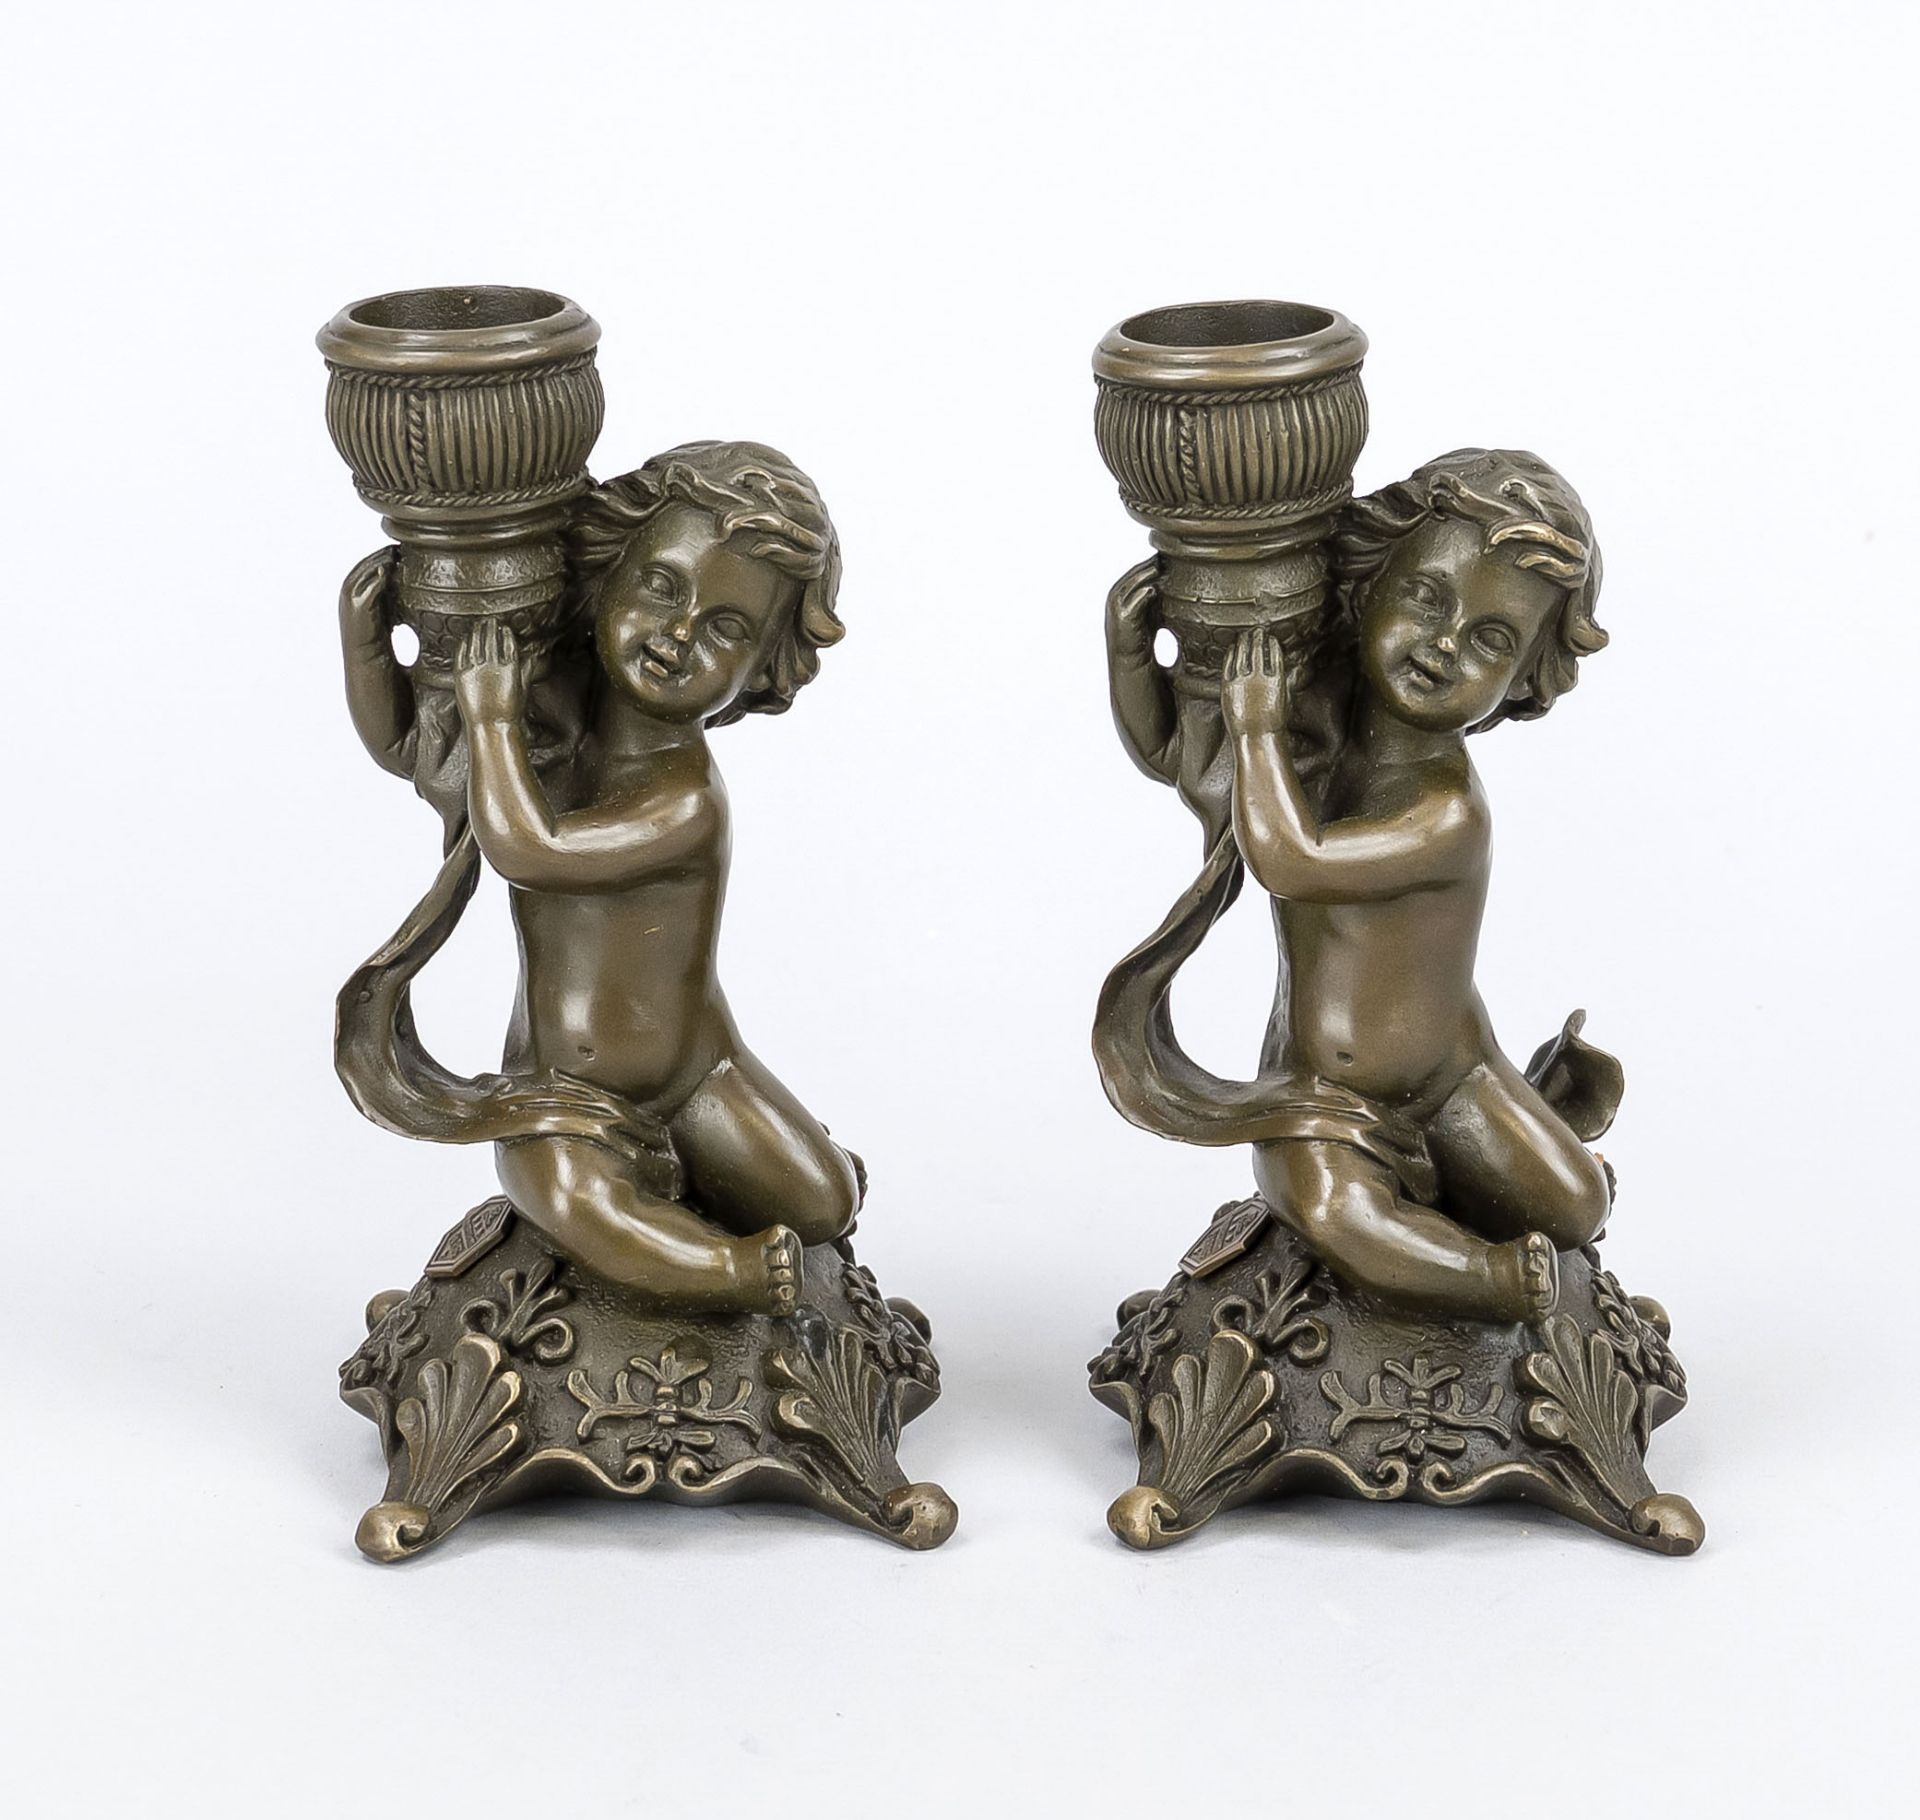 Two figural candle lamps, 20th century, patinated cast bronze, putto carrying the spout, h. 14 cm